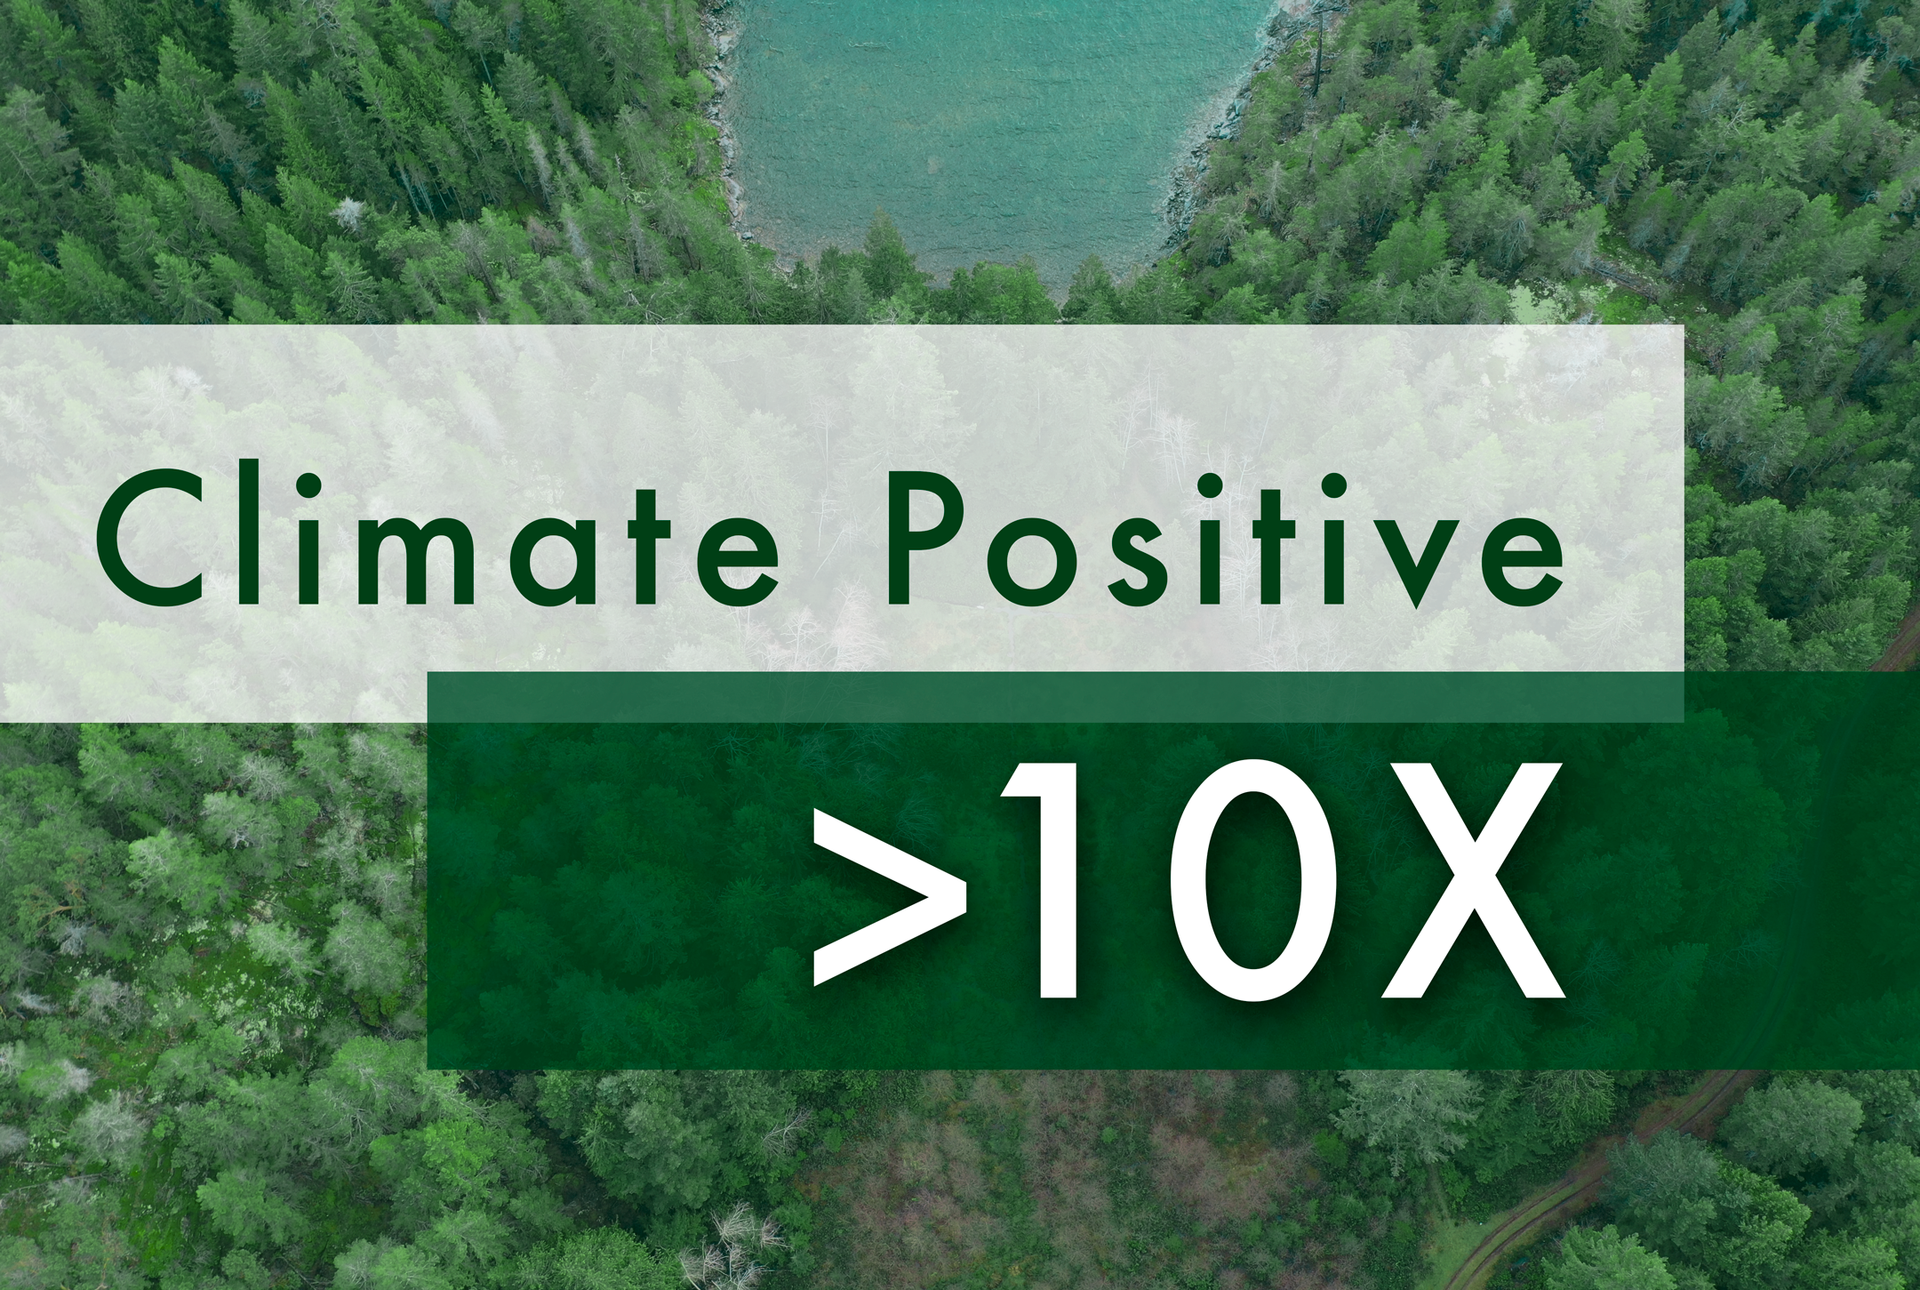 Our >10X Commitment to Being Climate Positive¹